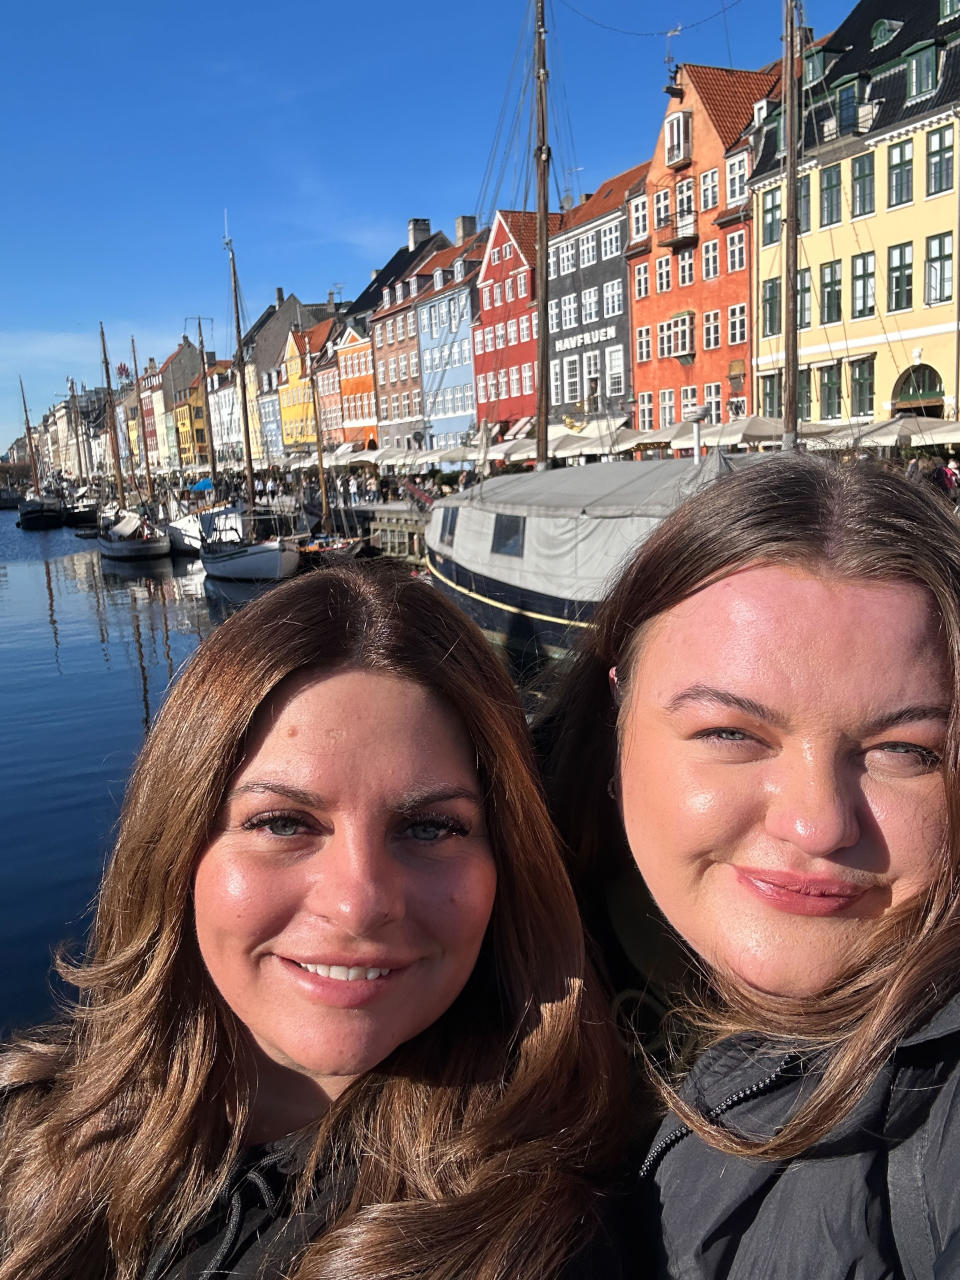 Becky Allison and Amy Scott went to Copenhagen for the day. (Caters)